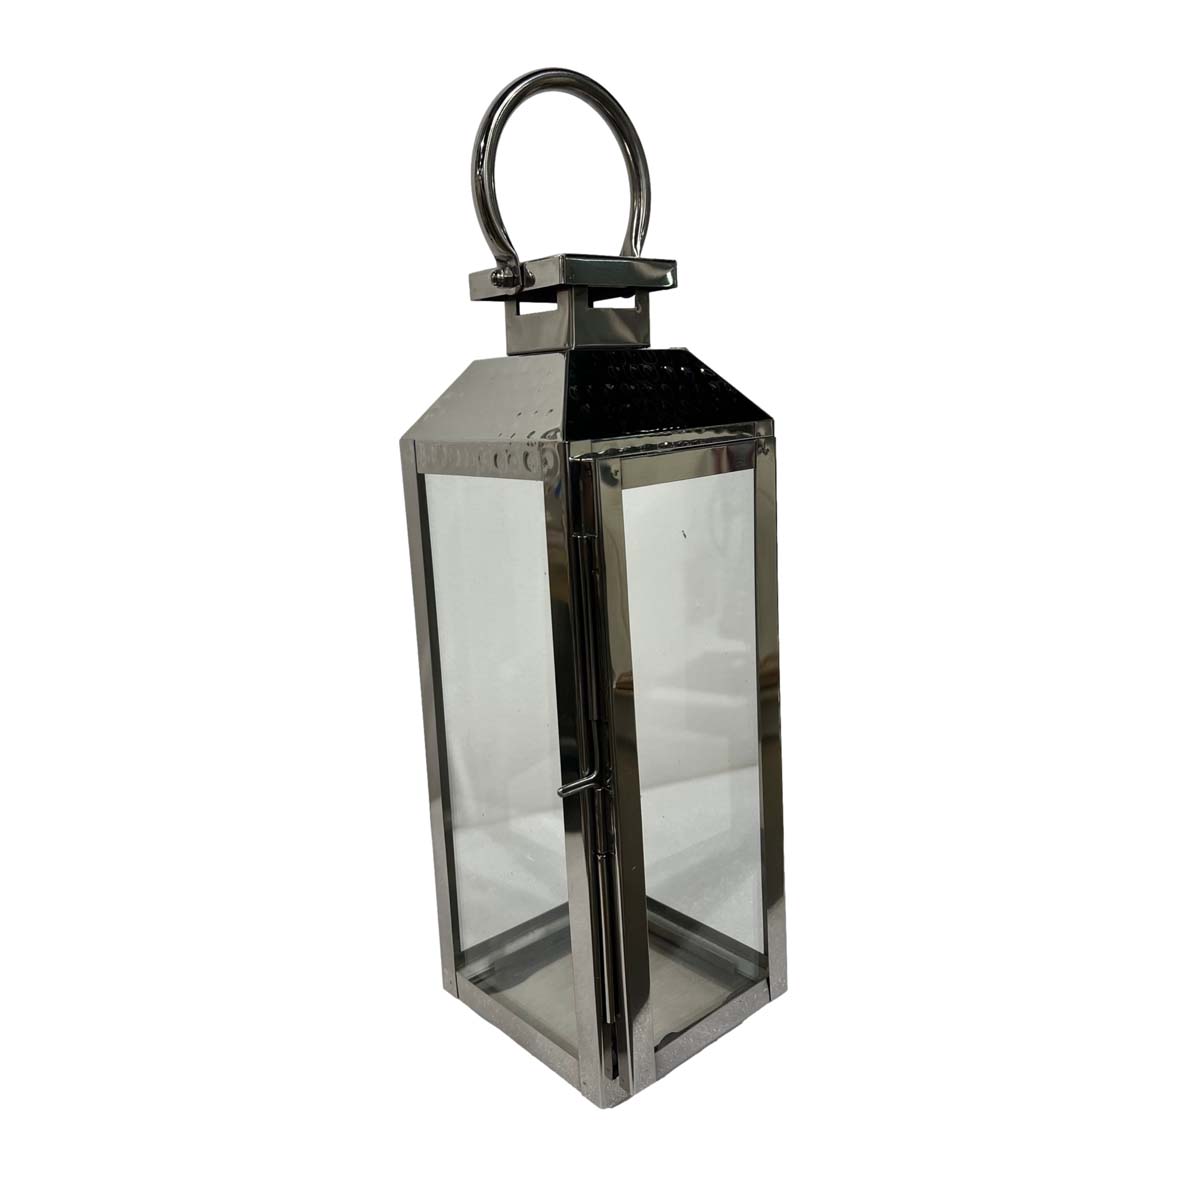 https://cdn11.bigcommerce.com/s-dfpexo62fe/images/stencil/original/products/19493/68612/WL11023__polished-nickel-candle-lantern-inset1__56868.1686591794.jpg?c=2&imbypass=on&imbypass=on